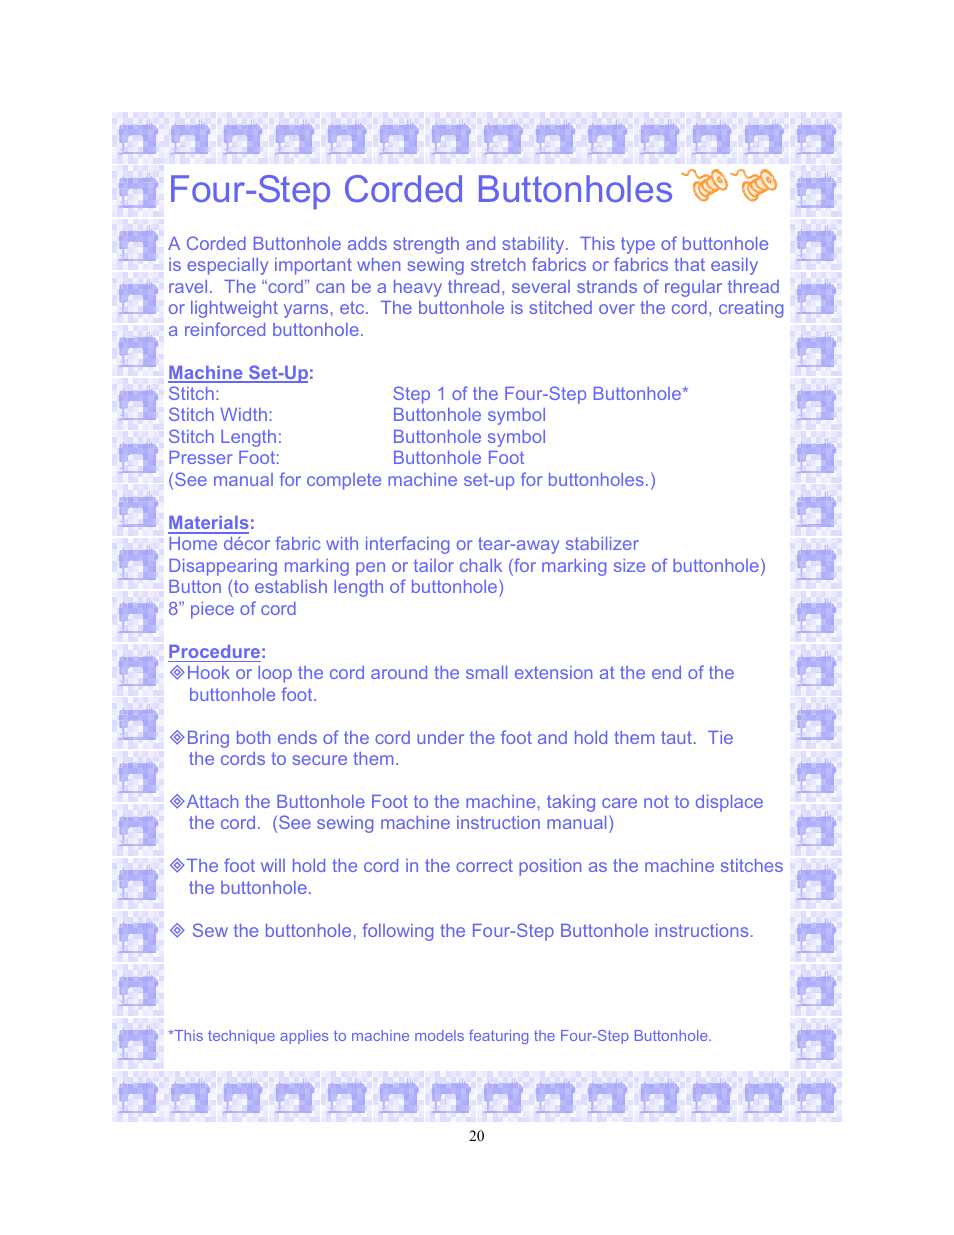 Four-step corded buttonholes | SINGER 6550-WORKBOOK Scholastic User Manual | Page 24 / 59